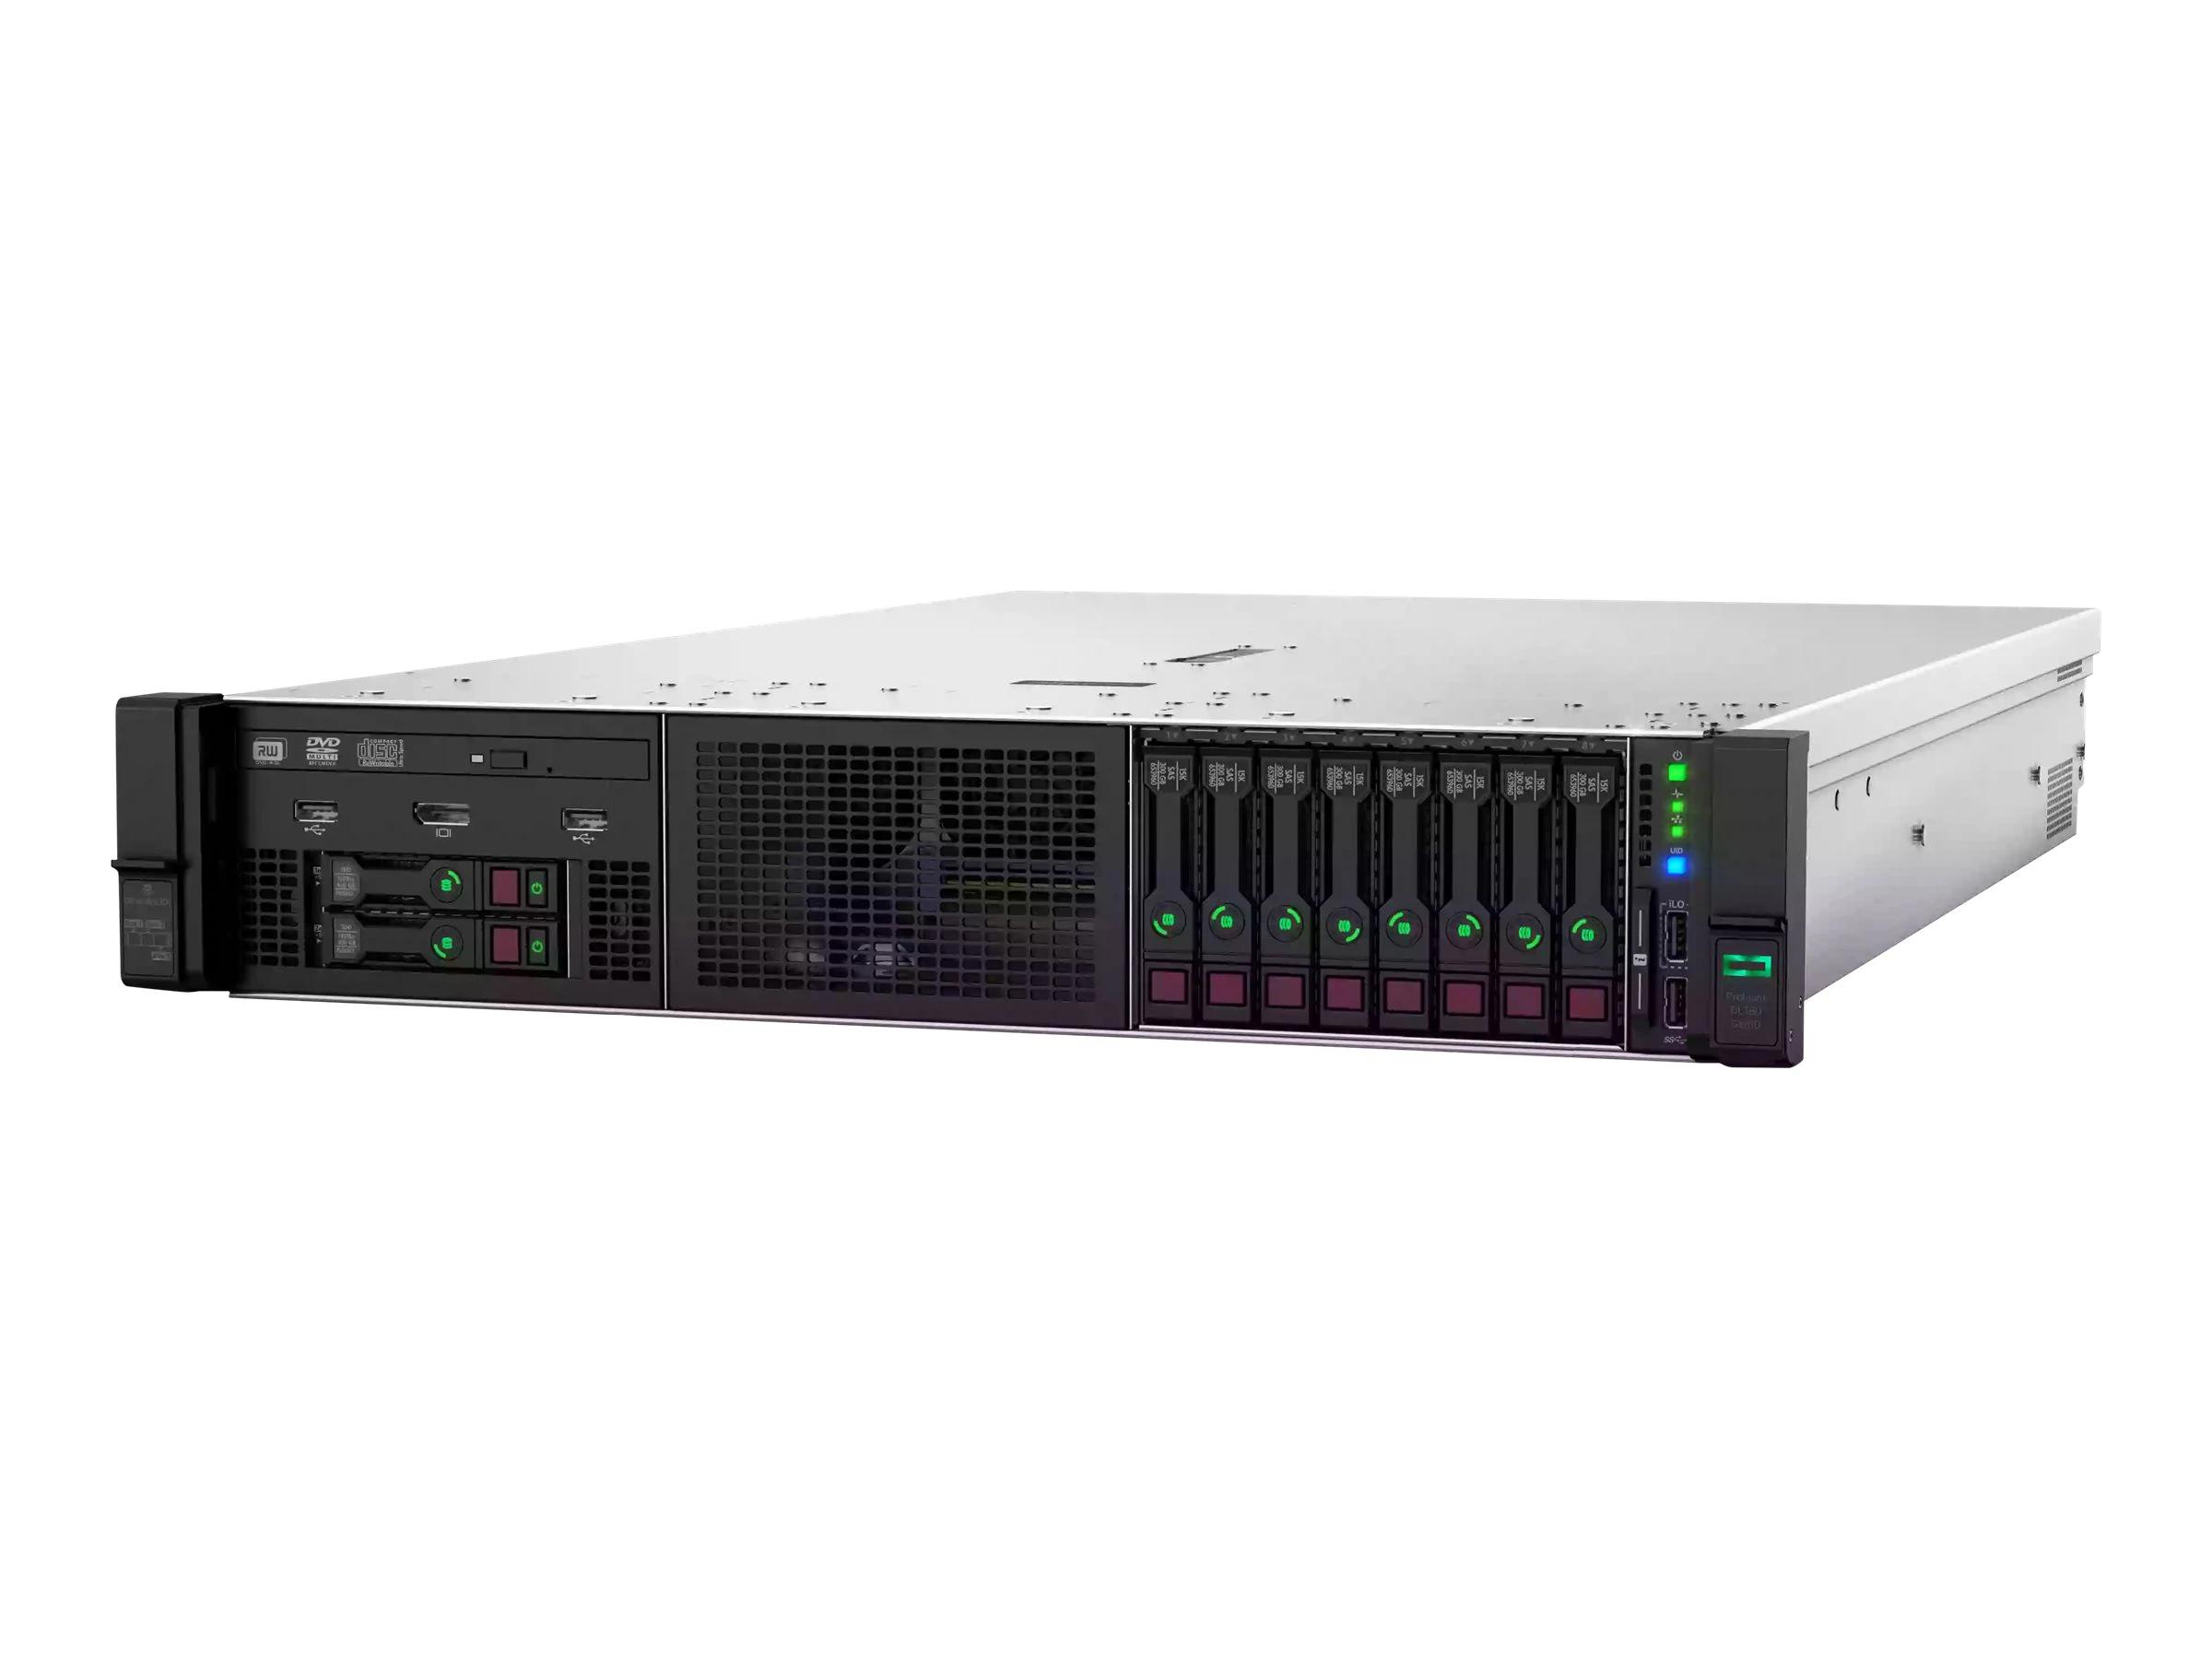 hewlett packard proliant dl380 - When did HP DL380 g10 come out